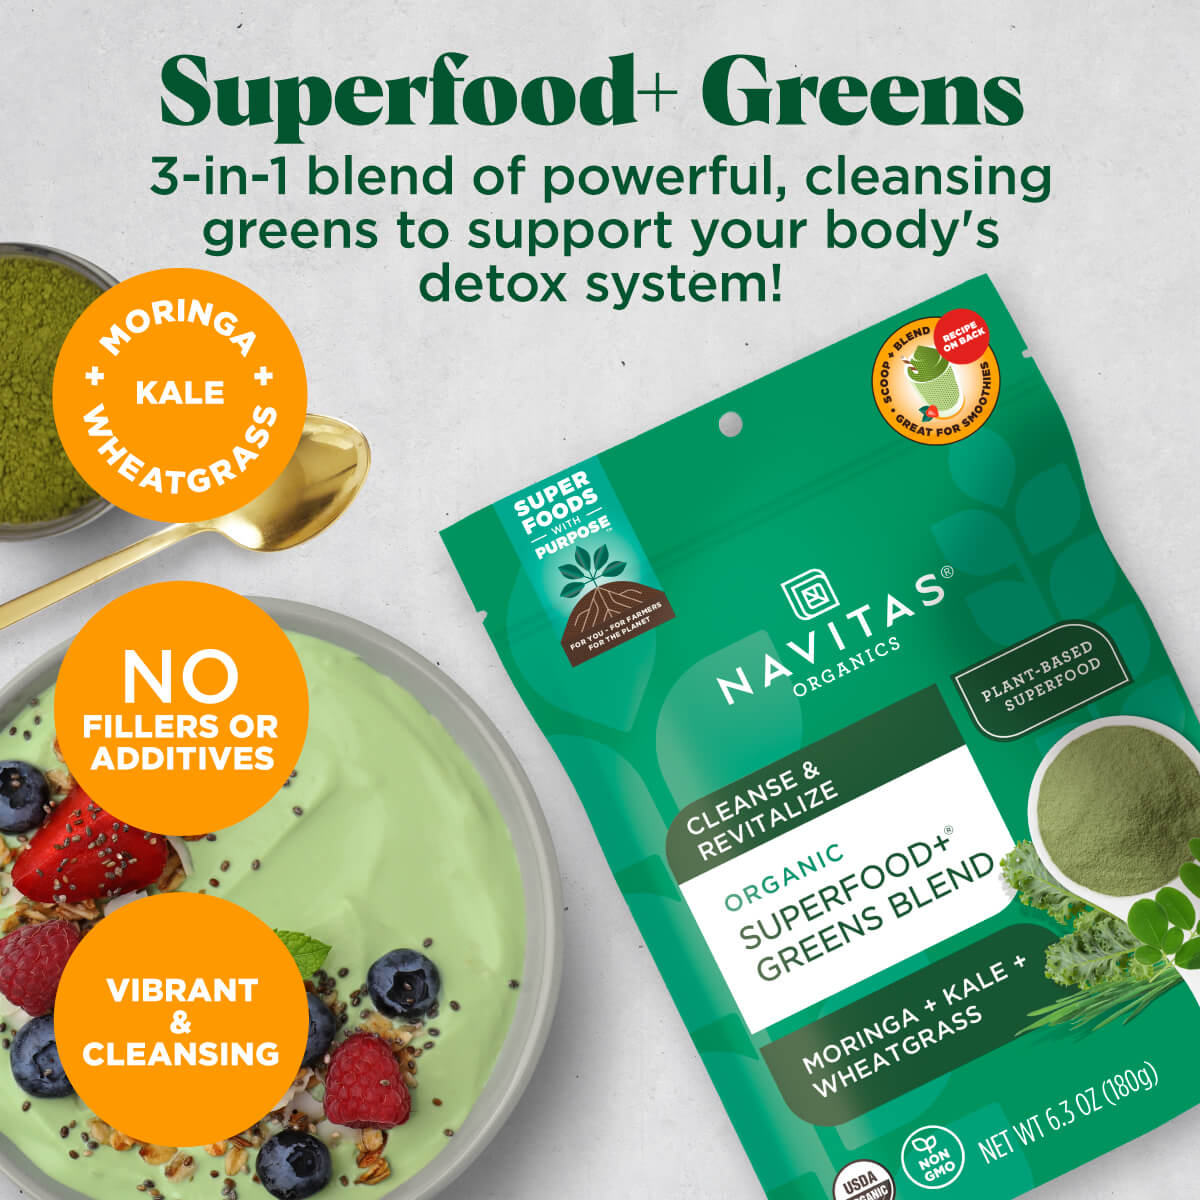 Navitas Organics Superfood+ Greens Blend is a 3-in-1 blend of powerful, cleansing greens to support your body's detox system!